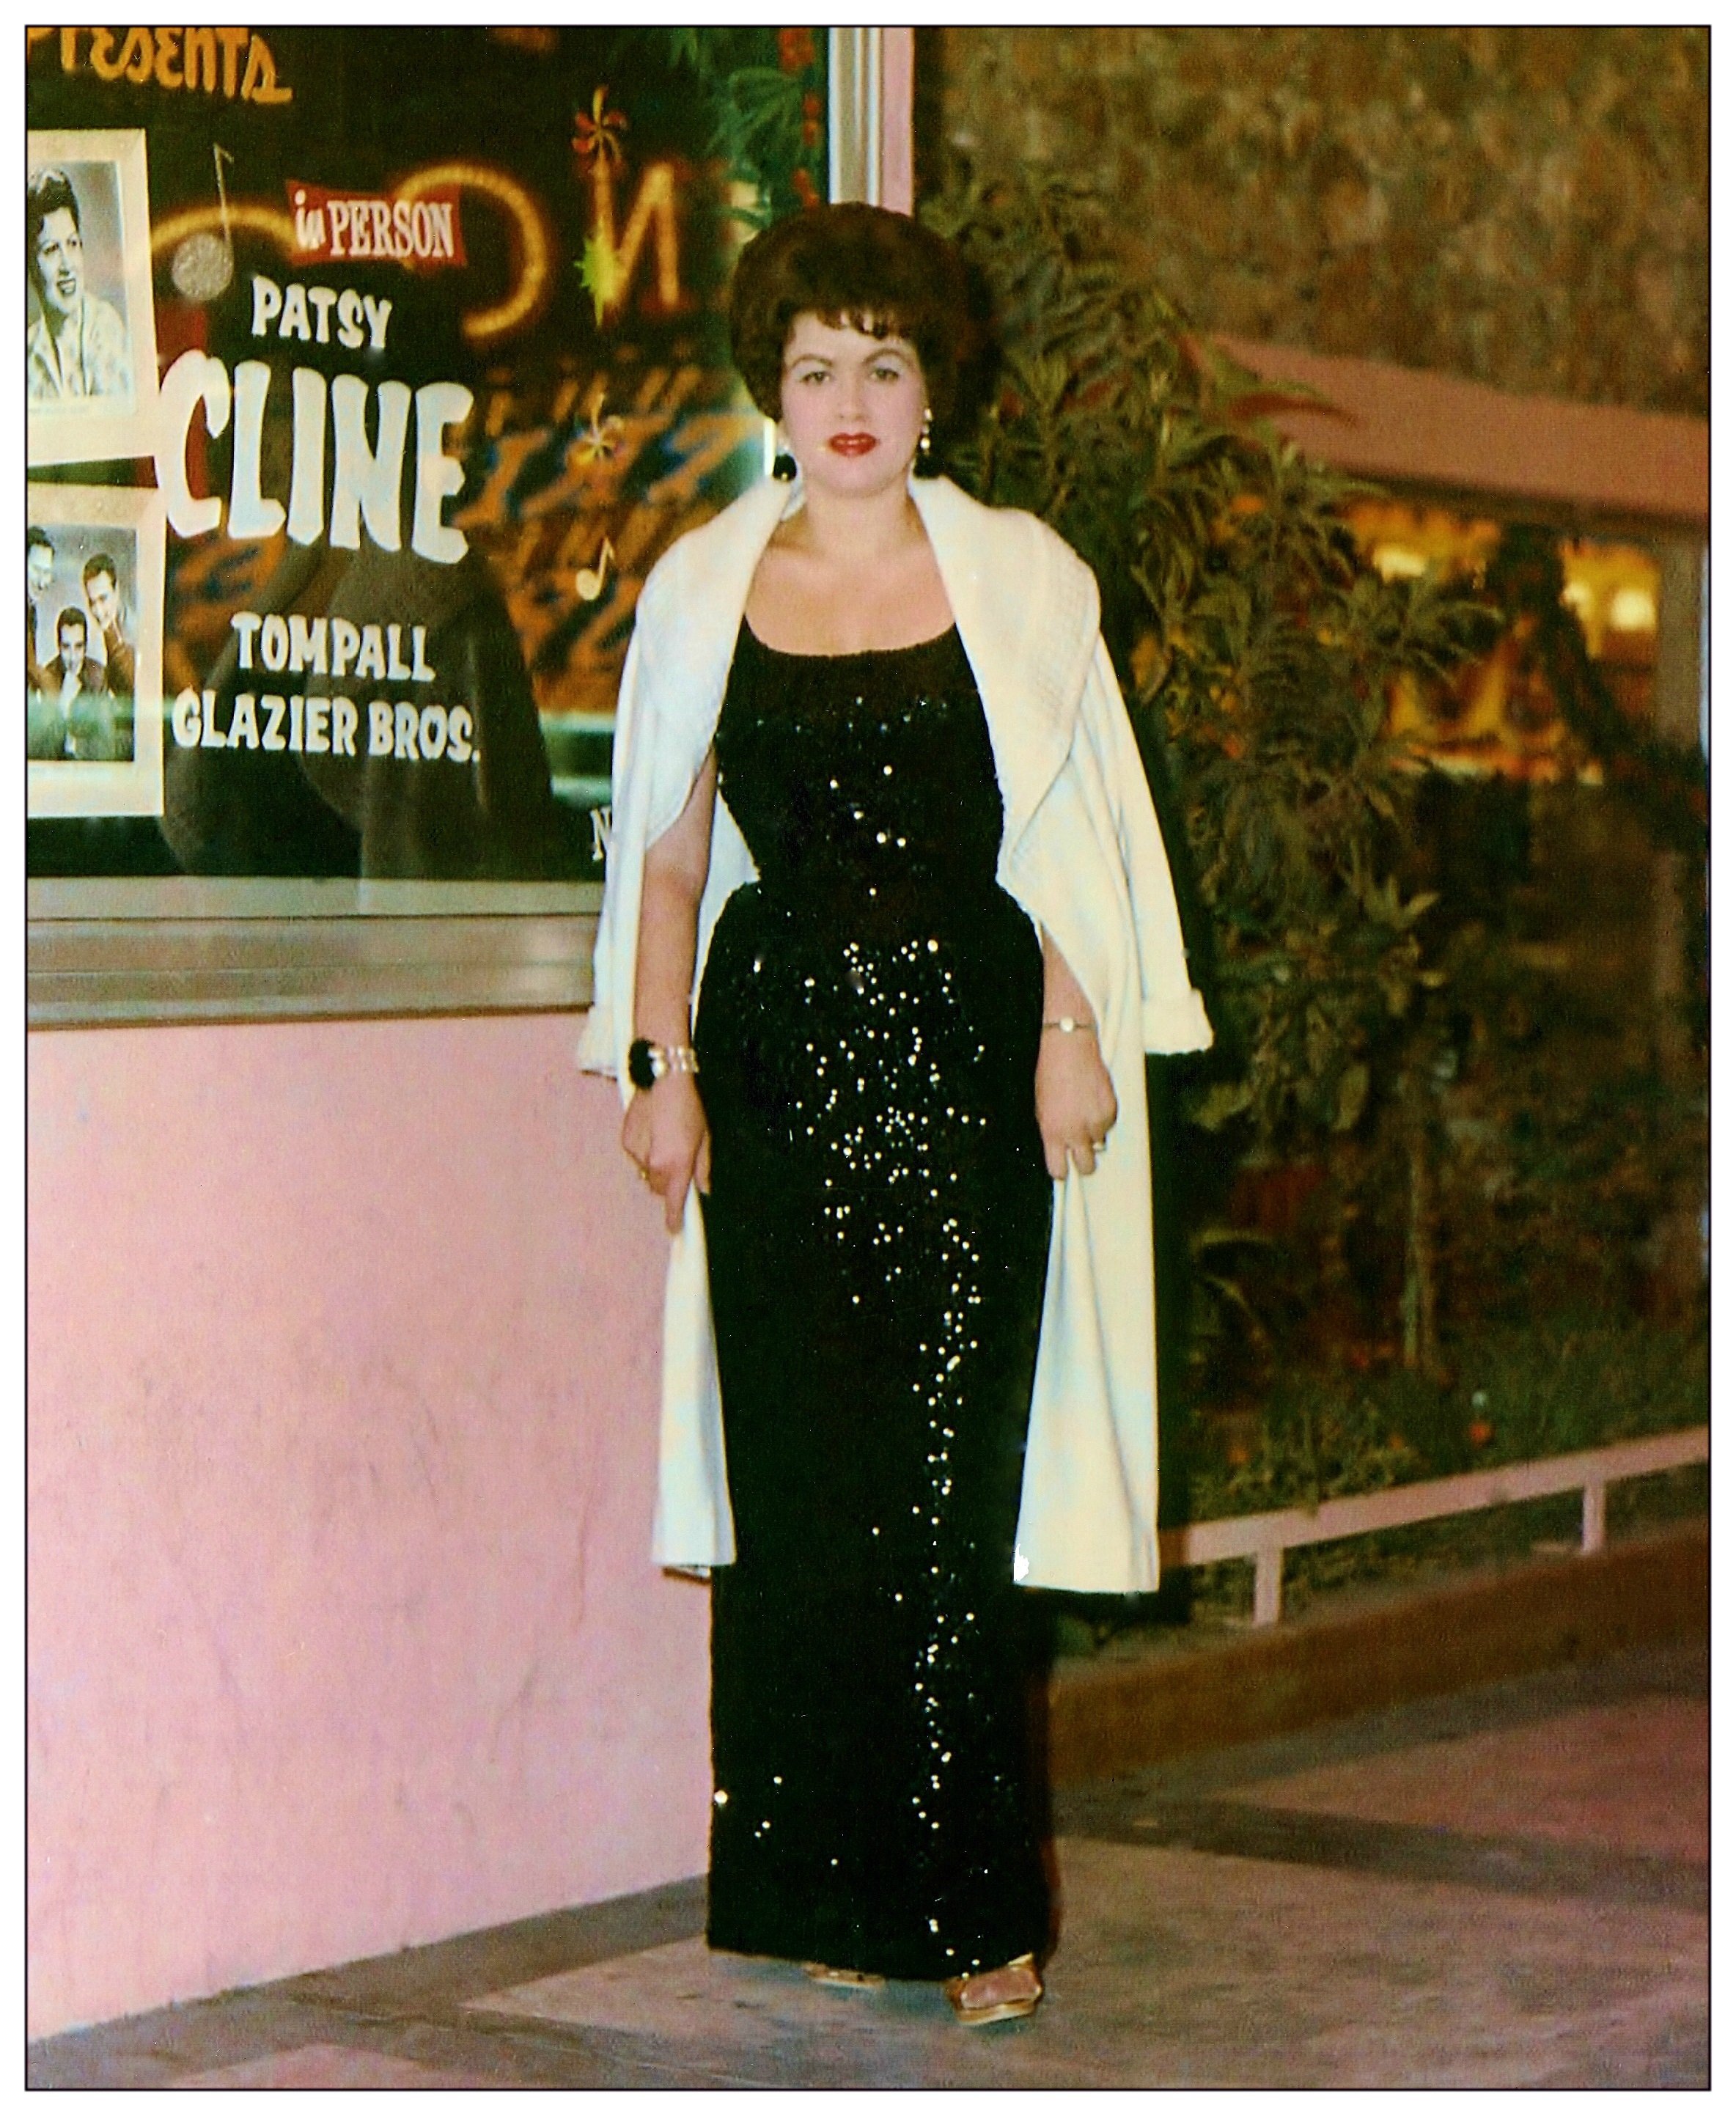 Patsy Cline at the Mint Casino in Las Vegas, Nevada. Circa 1962 | Source: Wikimedia Commons